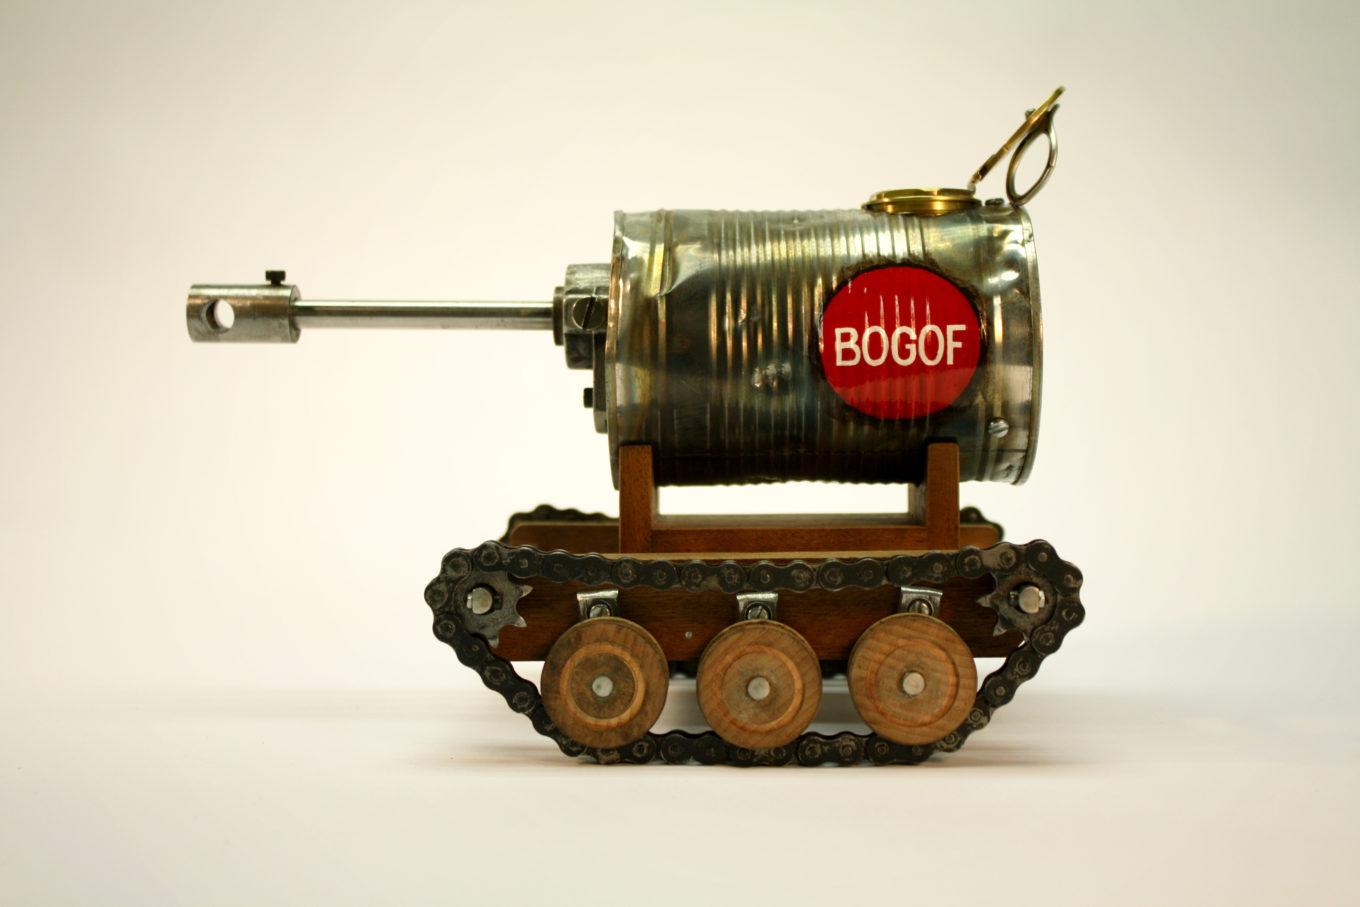 A toy tank made of wood and metal, the main body f the tank is a tin can.